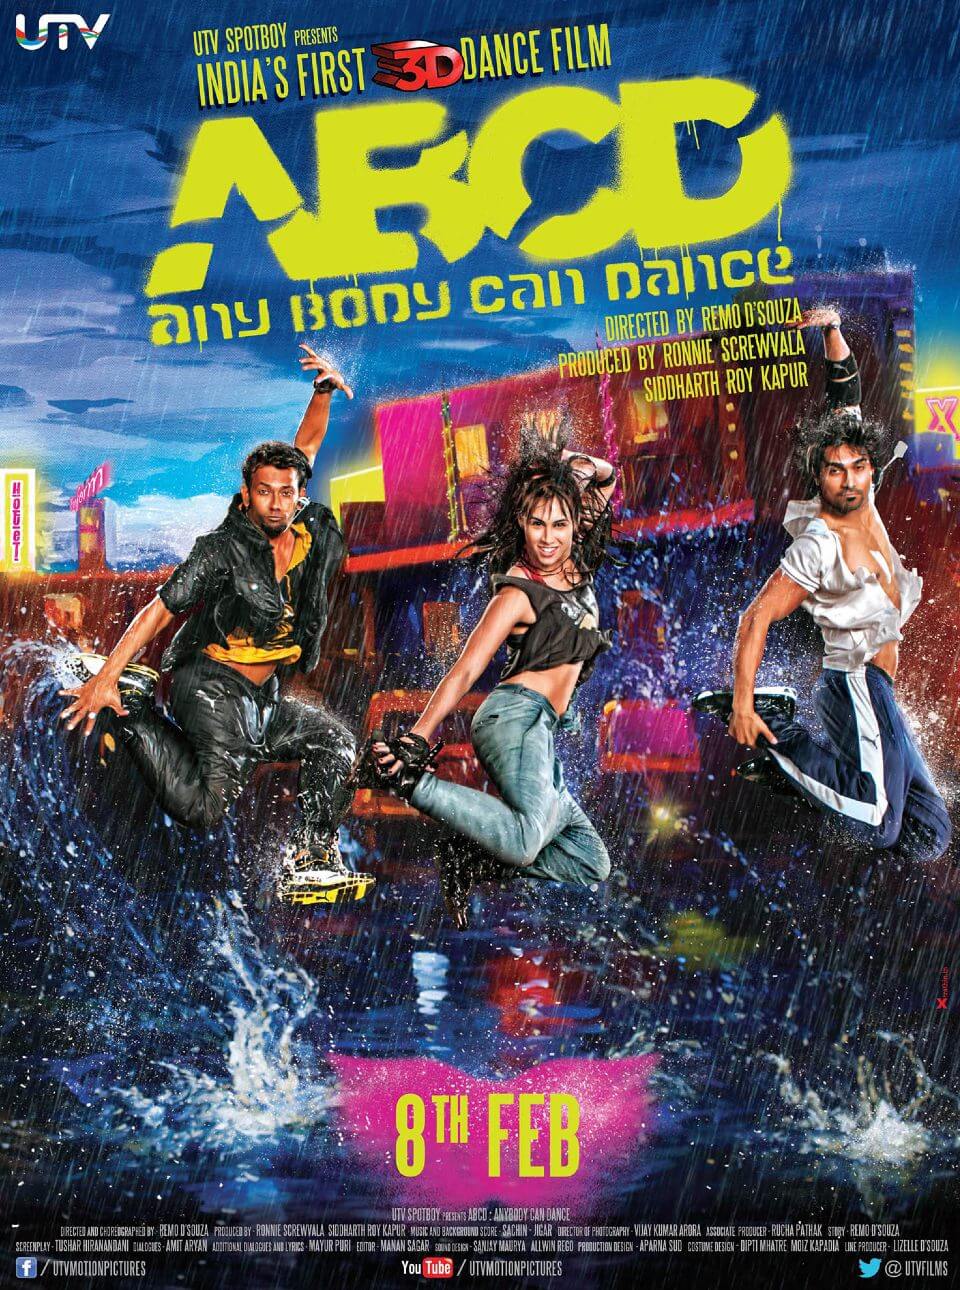 ABCD bollywood movie poster 